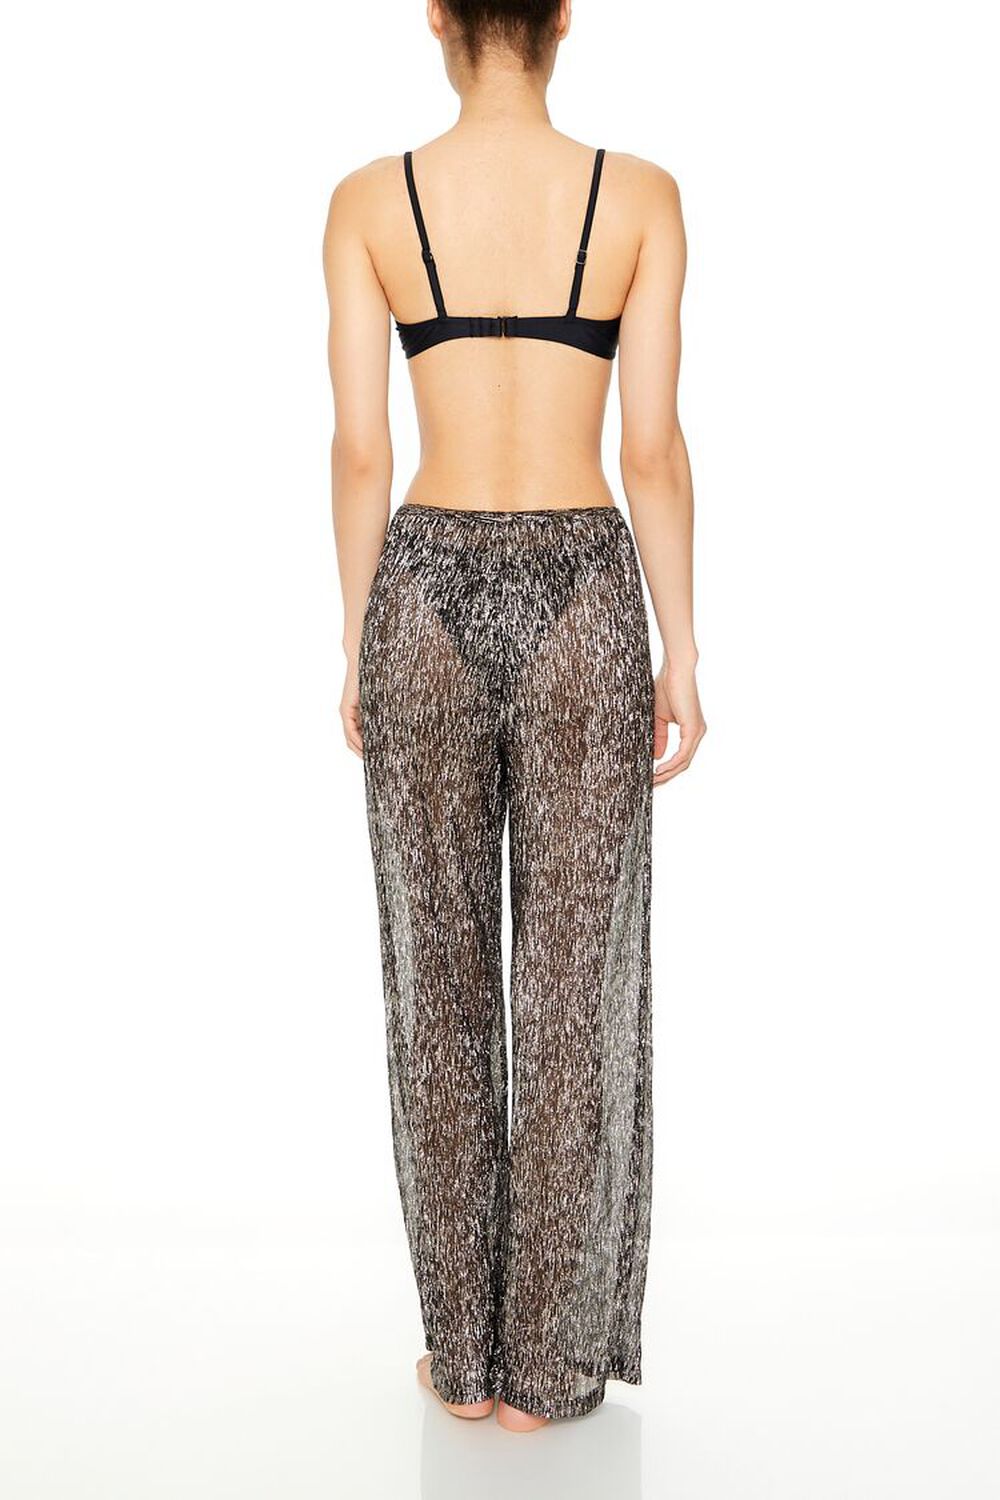 BLACK Shimmery Swim Cover-Up Pants, image 3